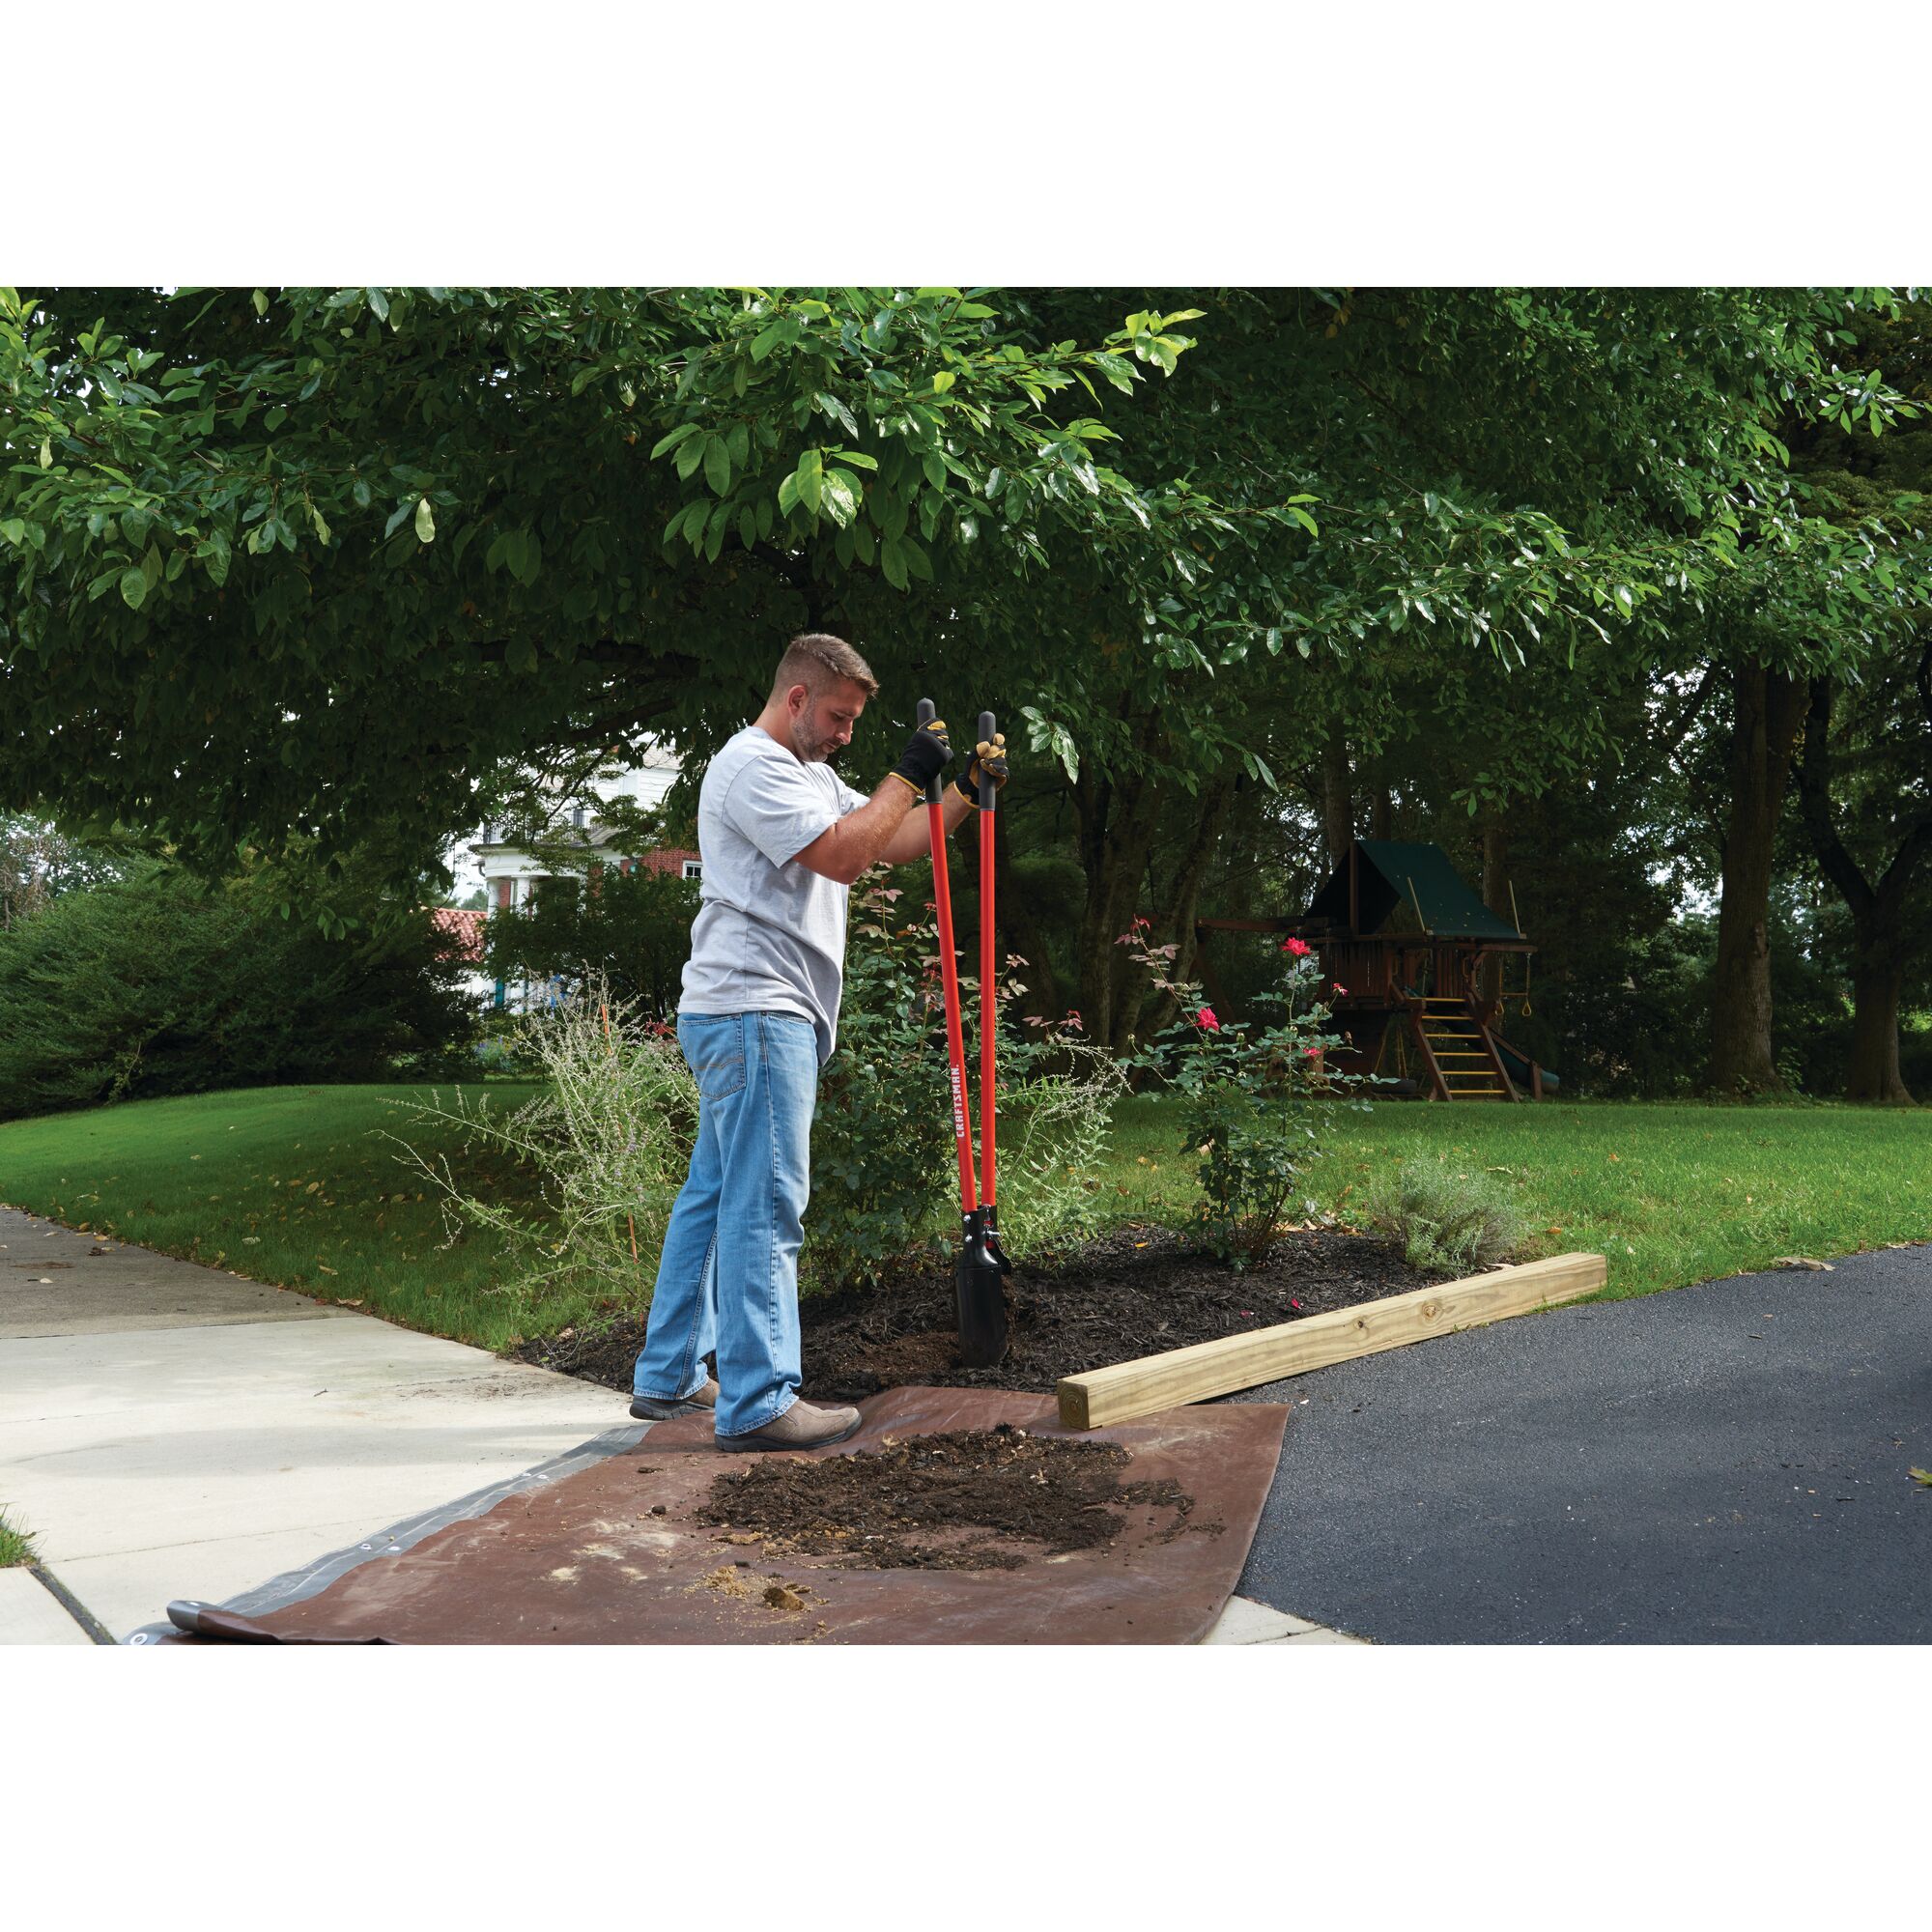 Fiberglass handle post hole digger being used by a person.